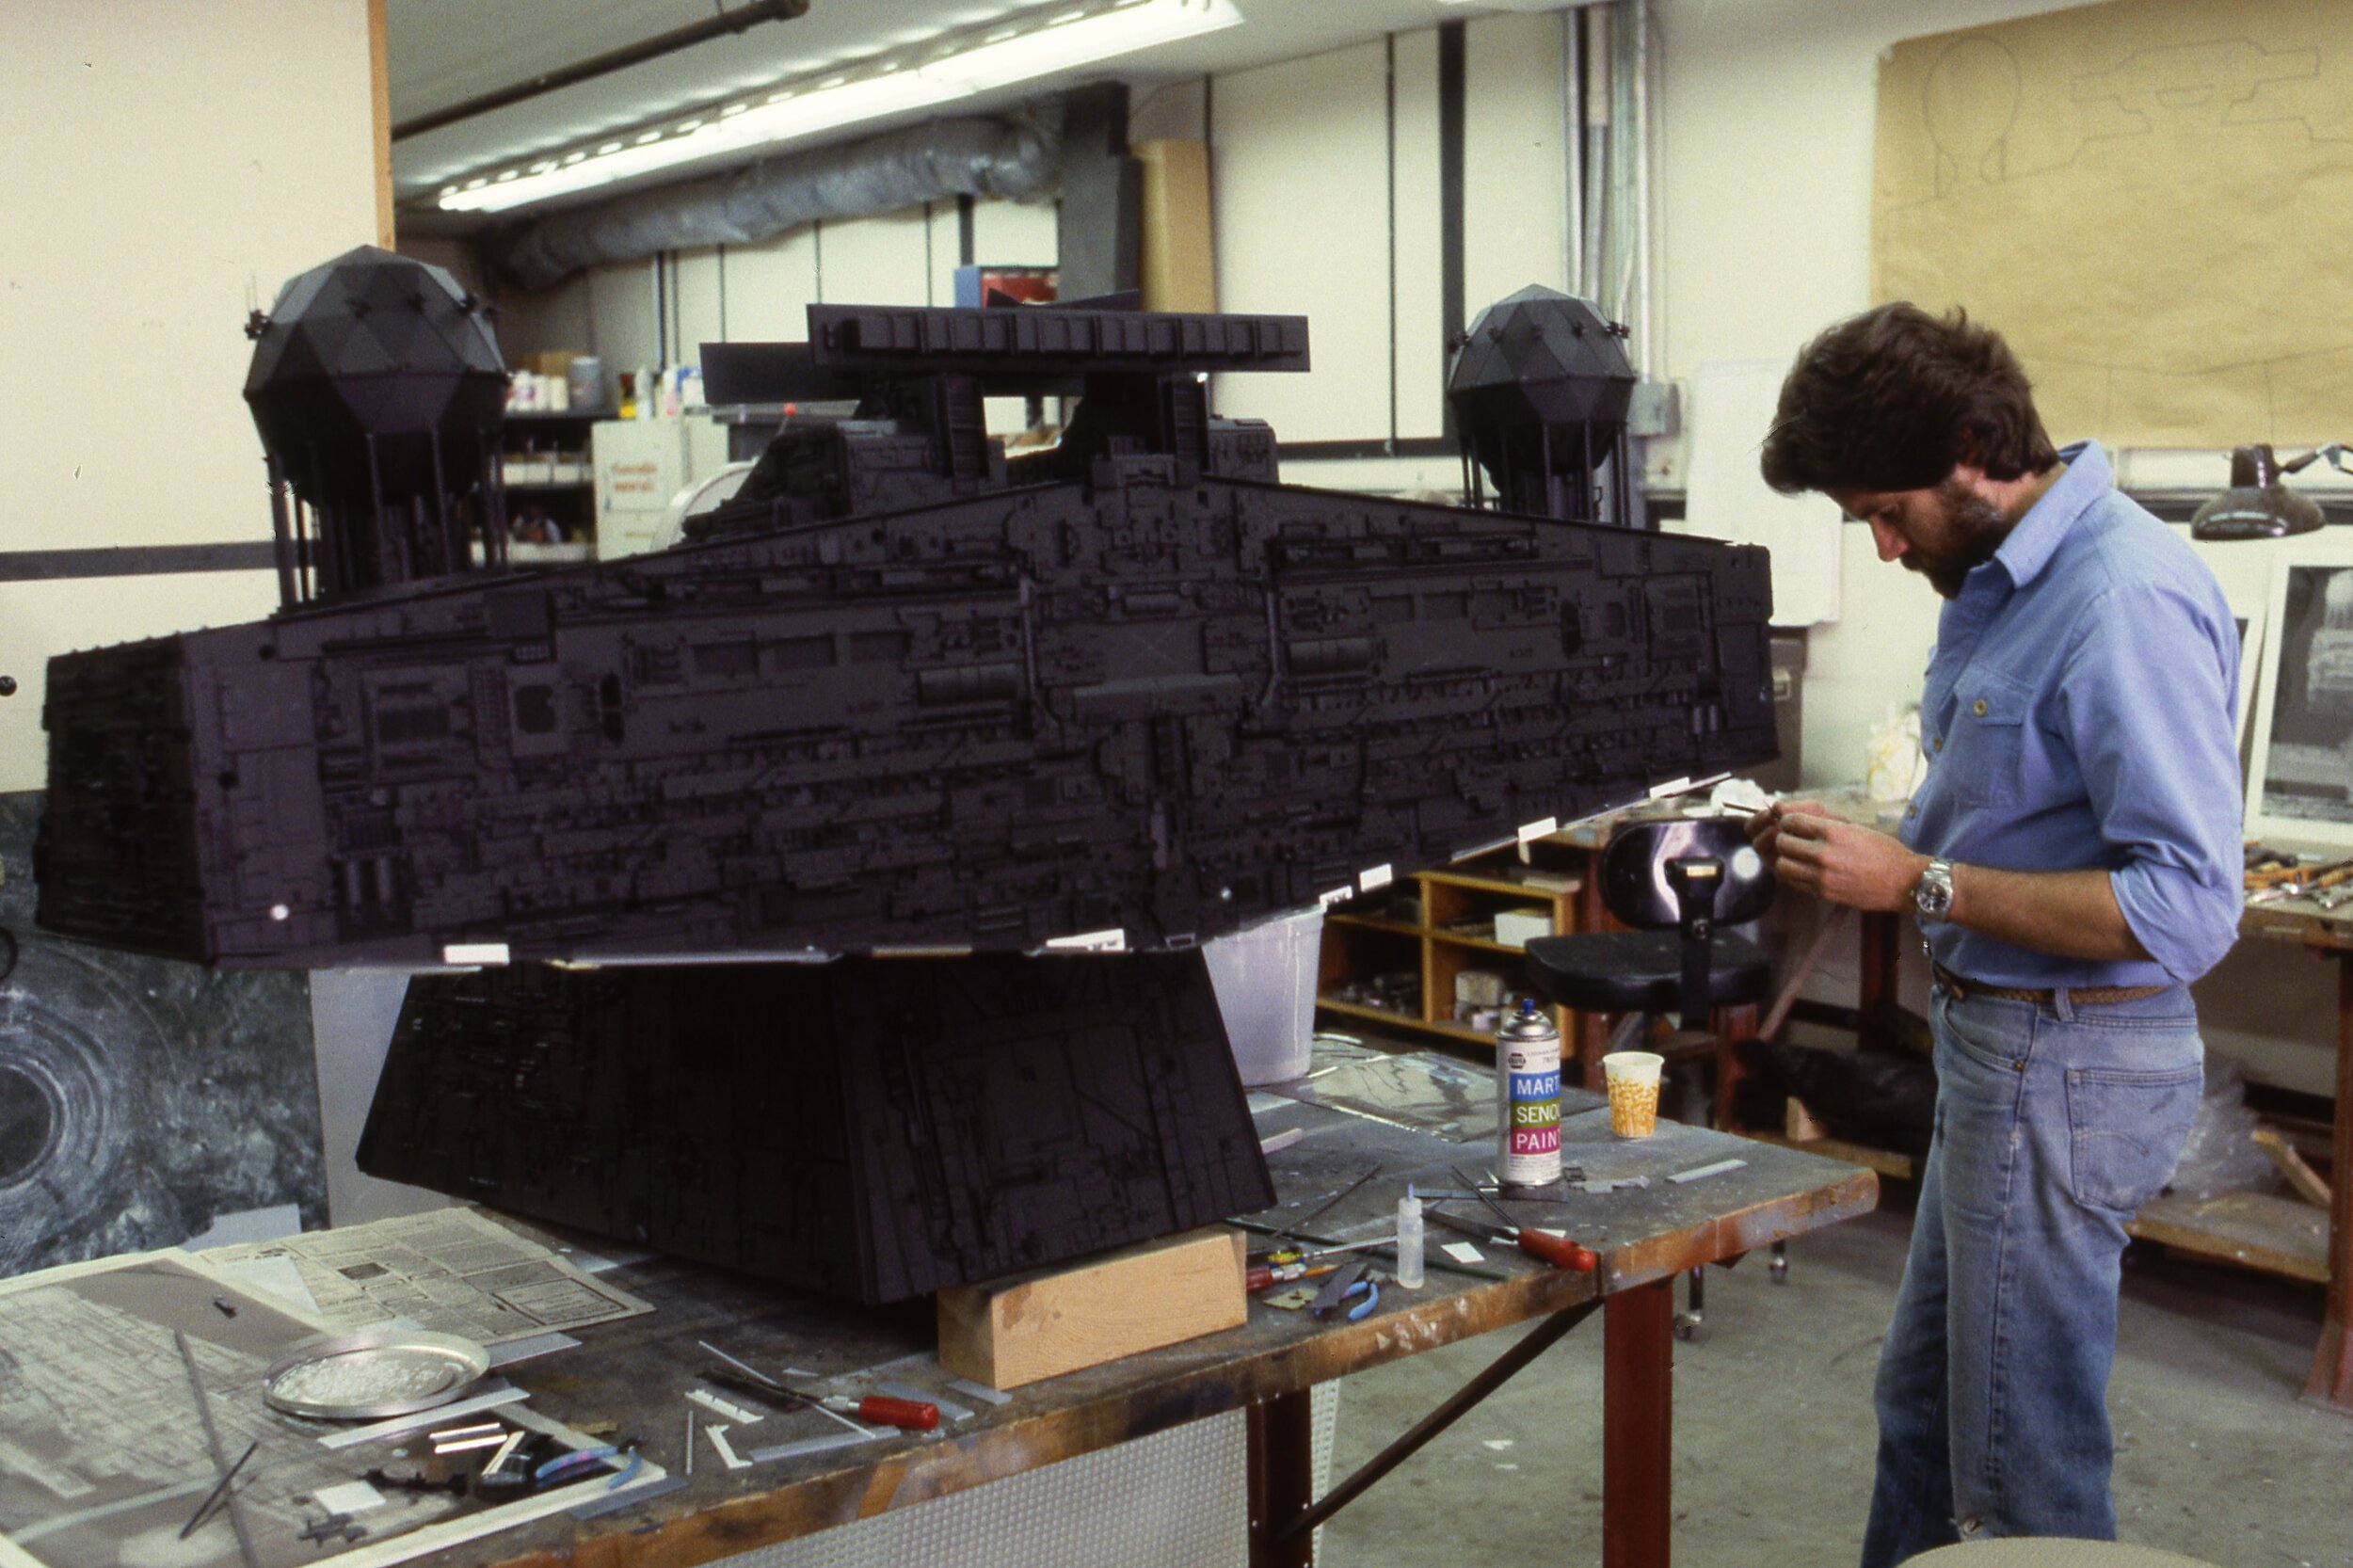  Jeff working in the model shop on a detailed model of a star destroyer bridge for Return of the Jedi. 